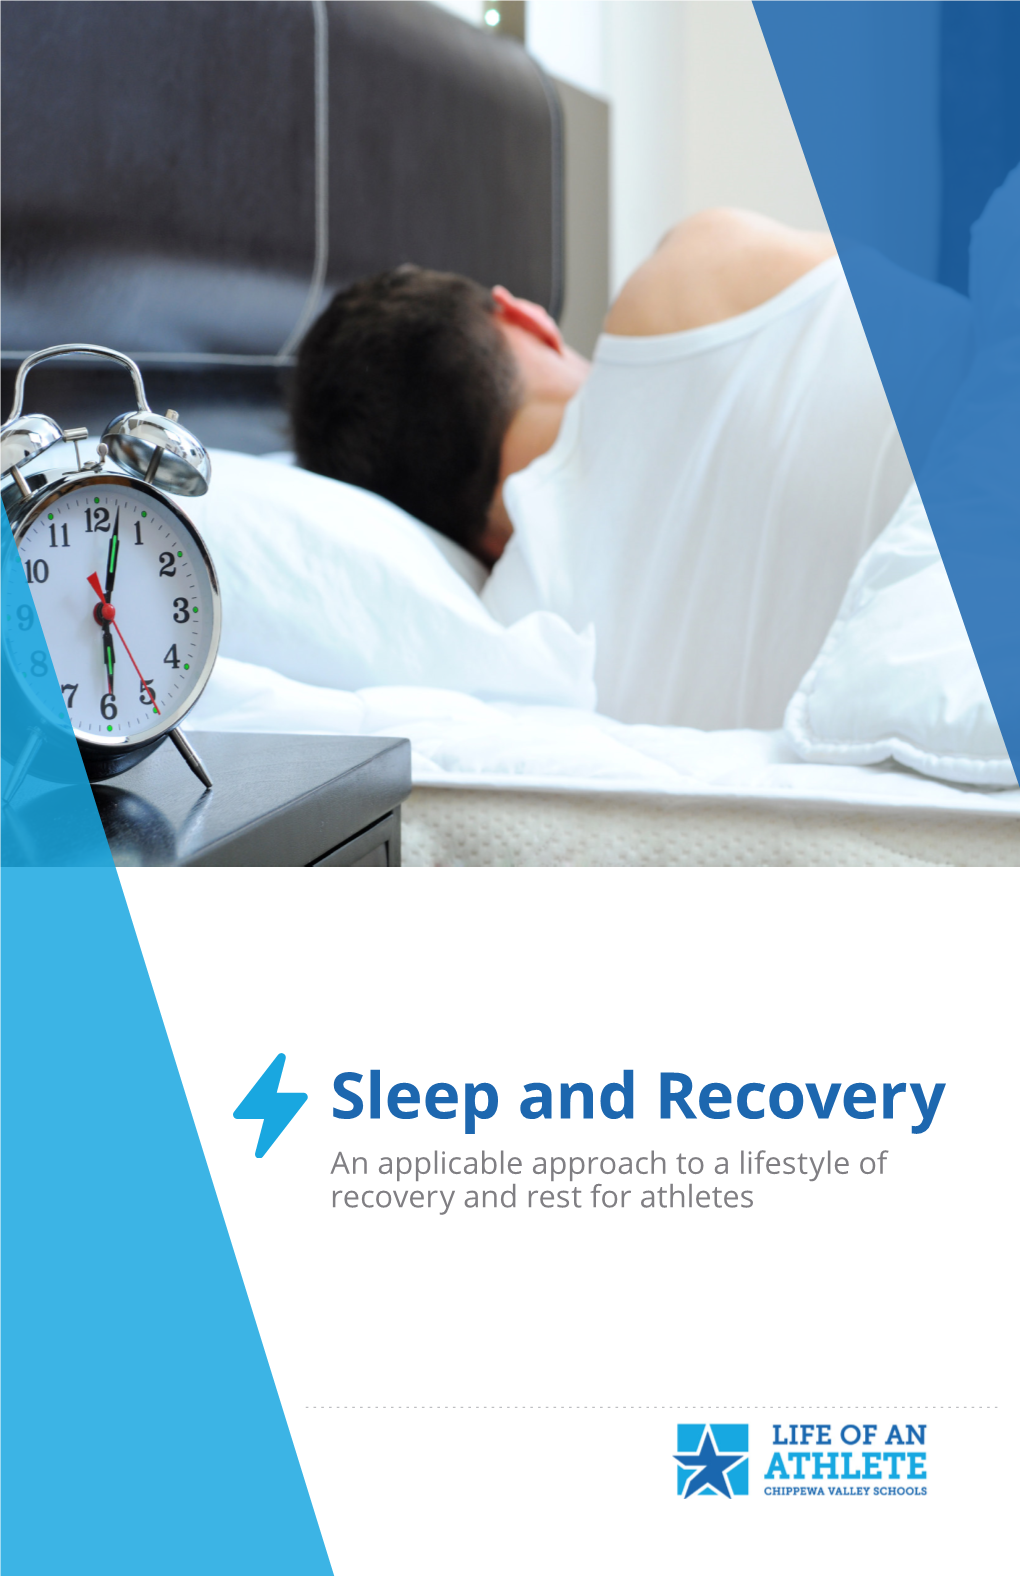 Sleep and Recovery an Applicable Approach to a Lifestyle of Recovery and Rest for Athletes